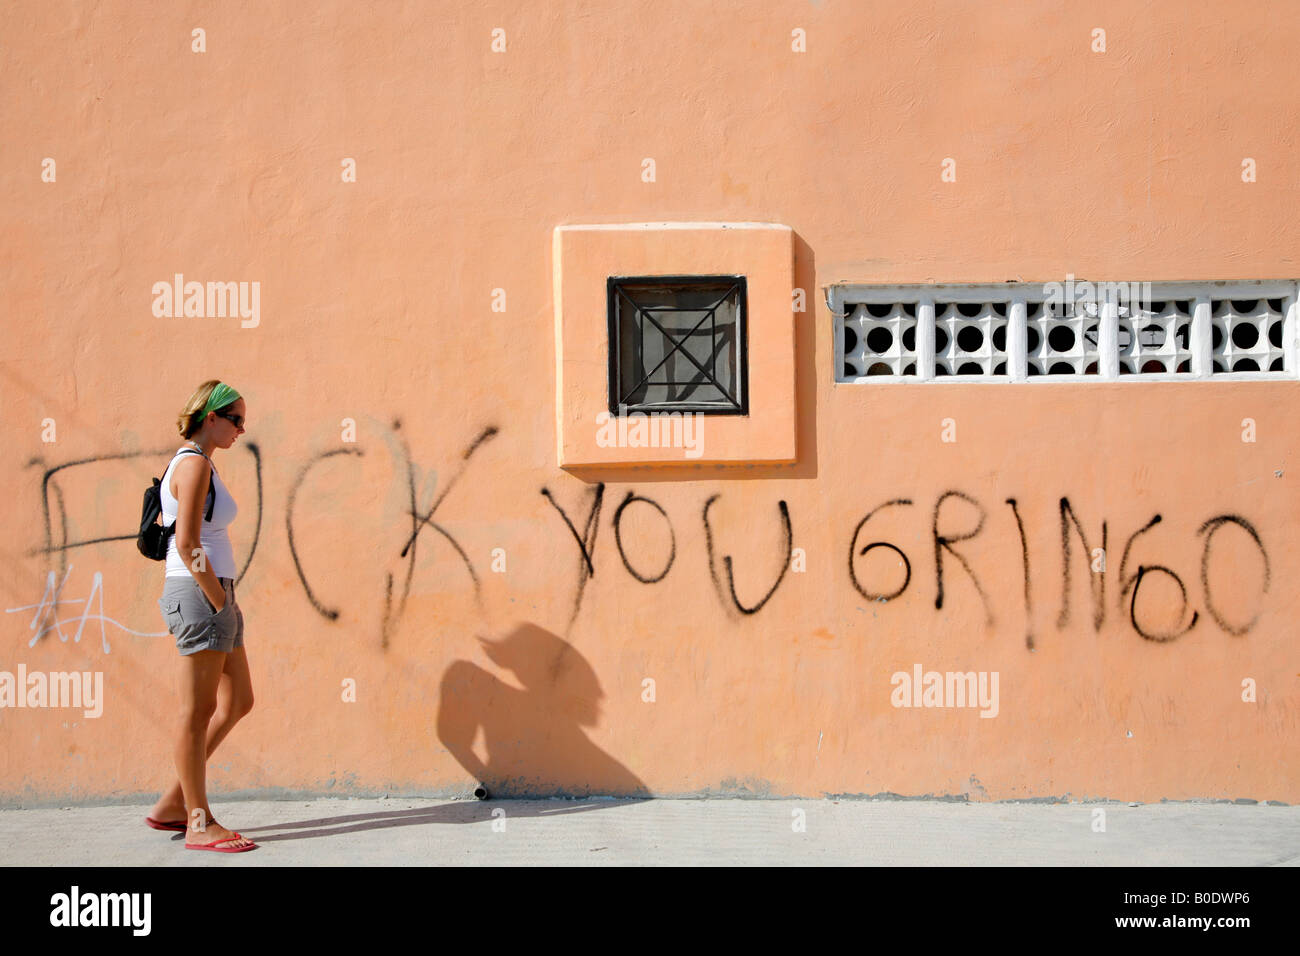 Welcome to Mexico; uncharacteristic graffiti on a wall in Playa del Carmen Stock Photo